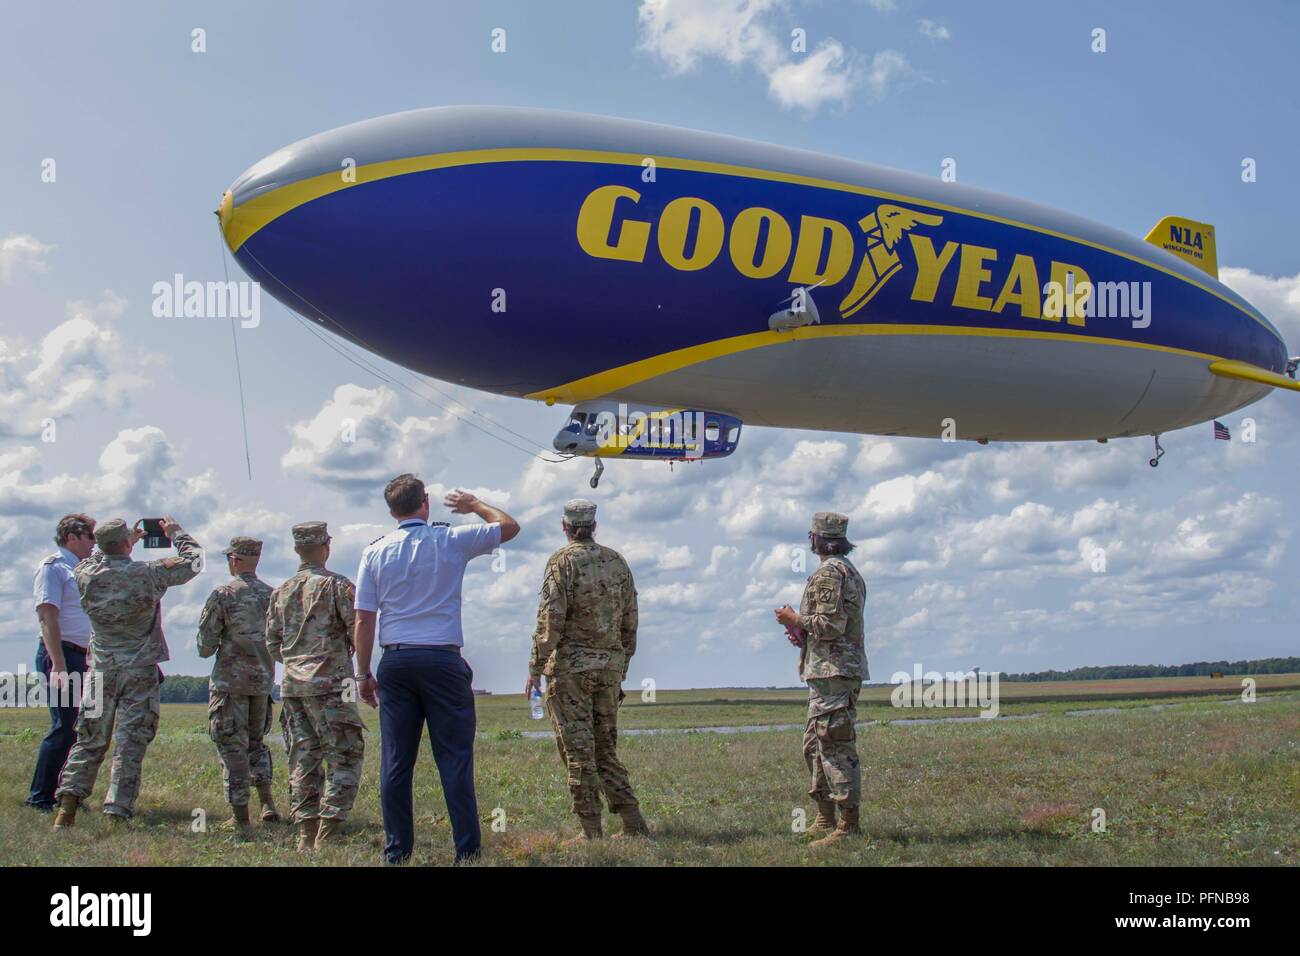 Pictures: Goodyear's new state-of-the-art airship arrives for Daytona 500 –  Orlando Sentinel